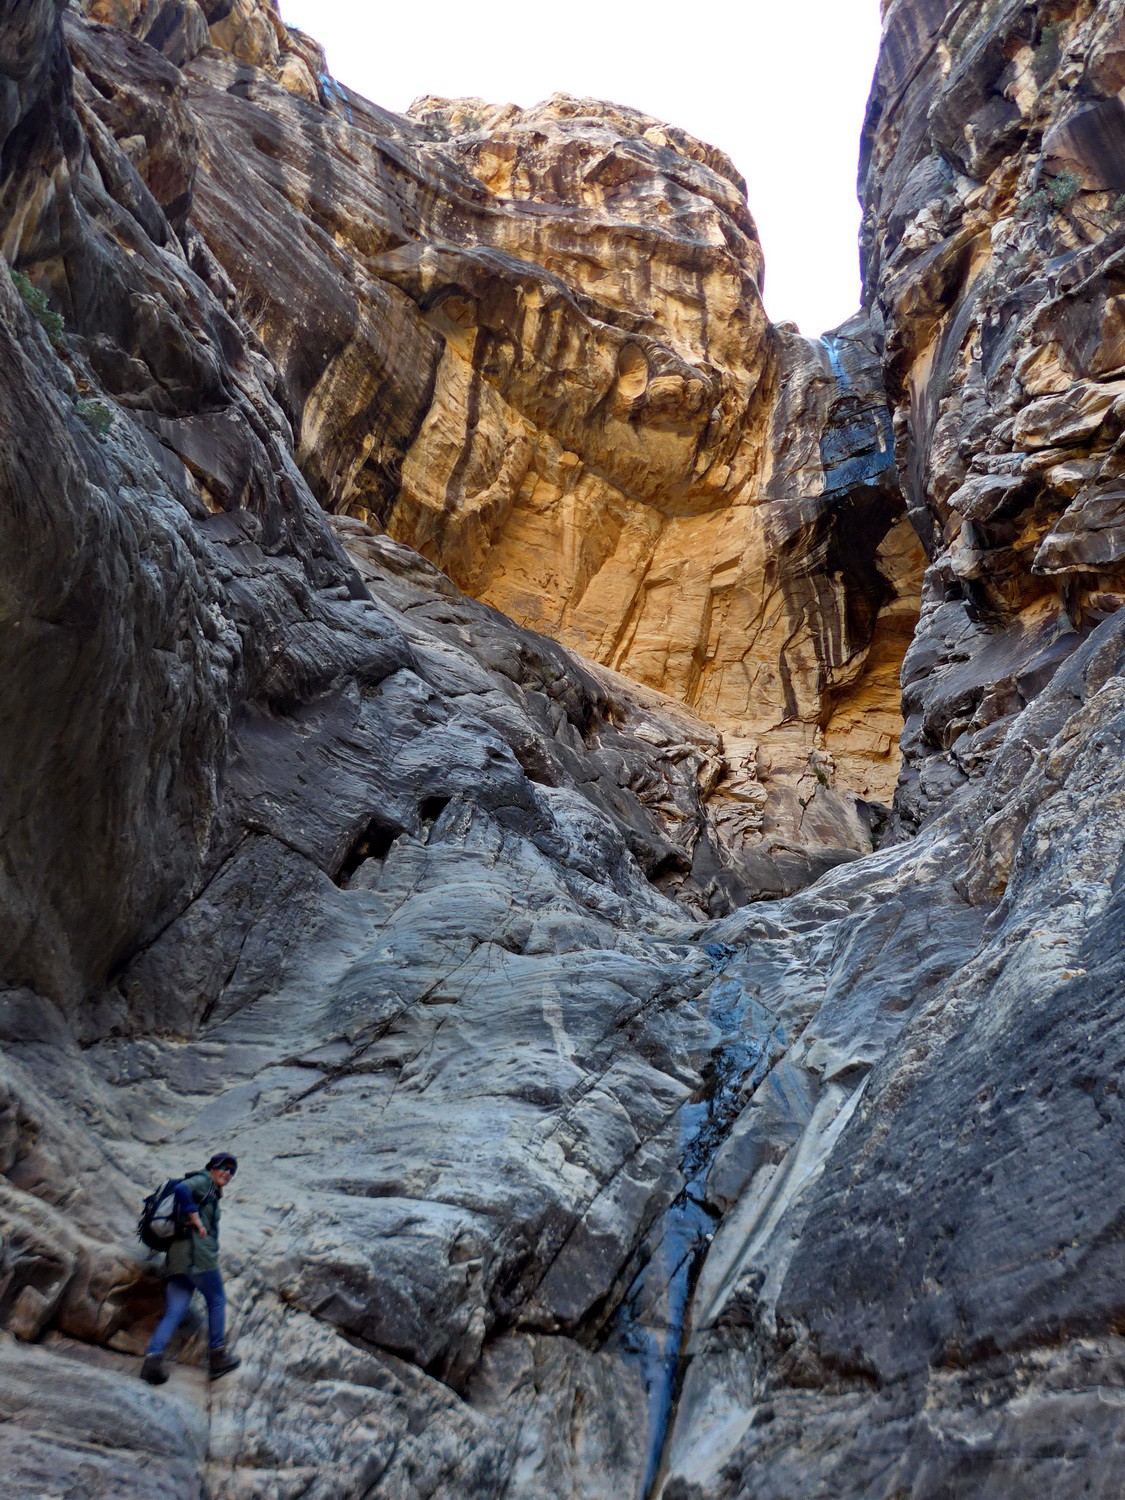 End of the trail into the Ice Box Canyon of the Rad Rock Canyon